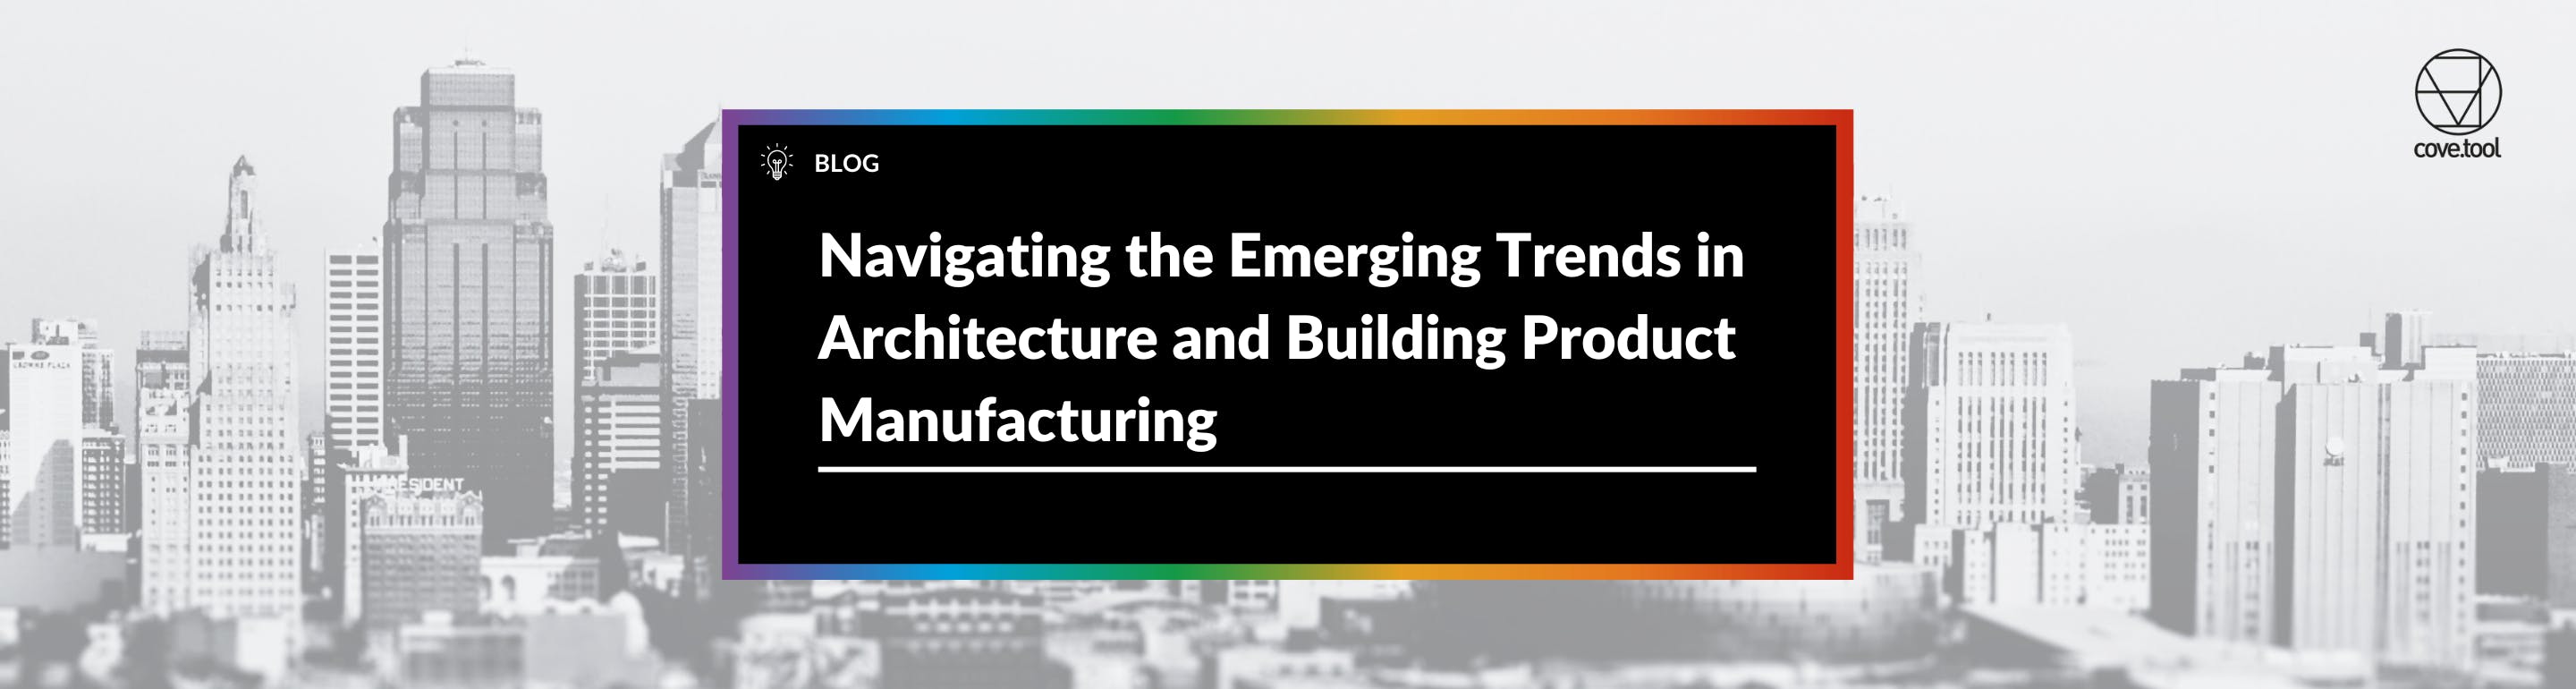 Navigating the Emerging Trends in Architecture and Building Product Manufacturing